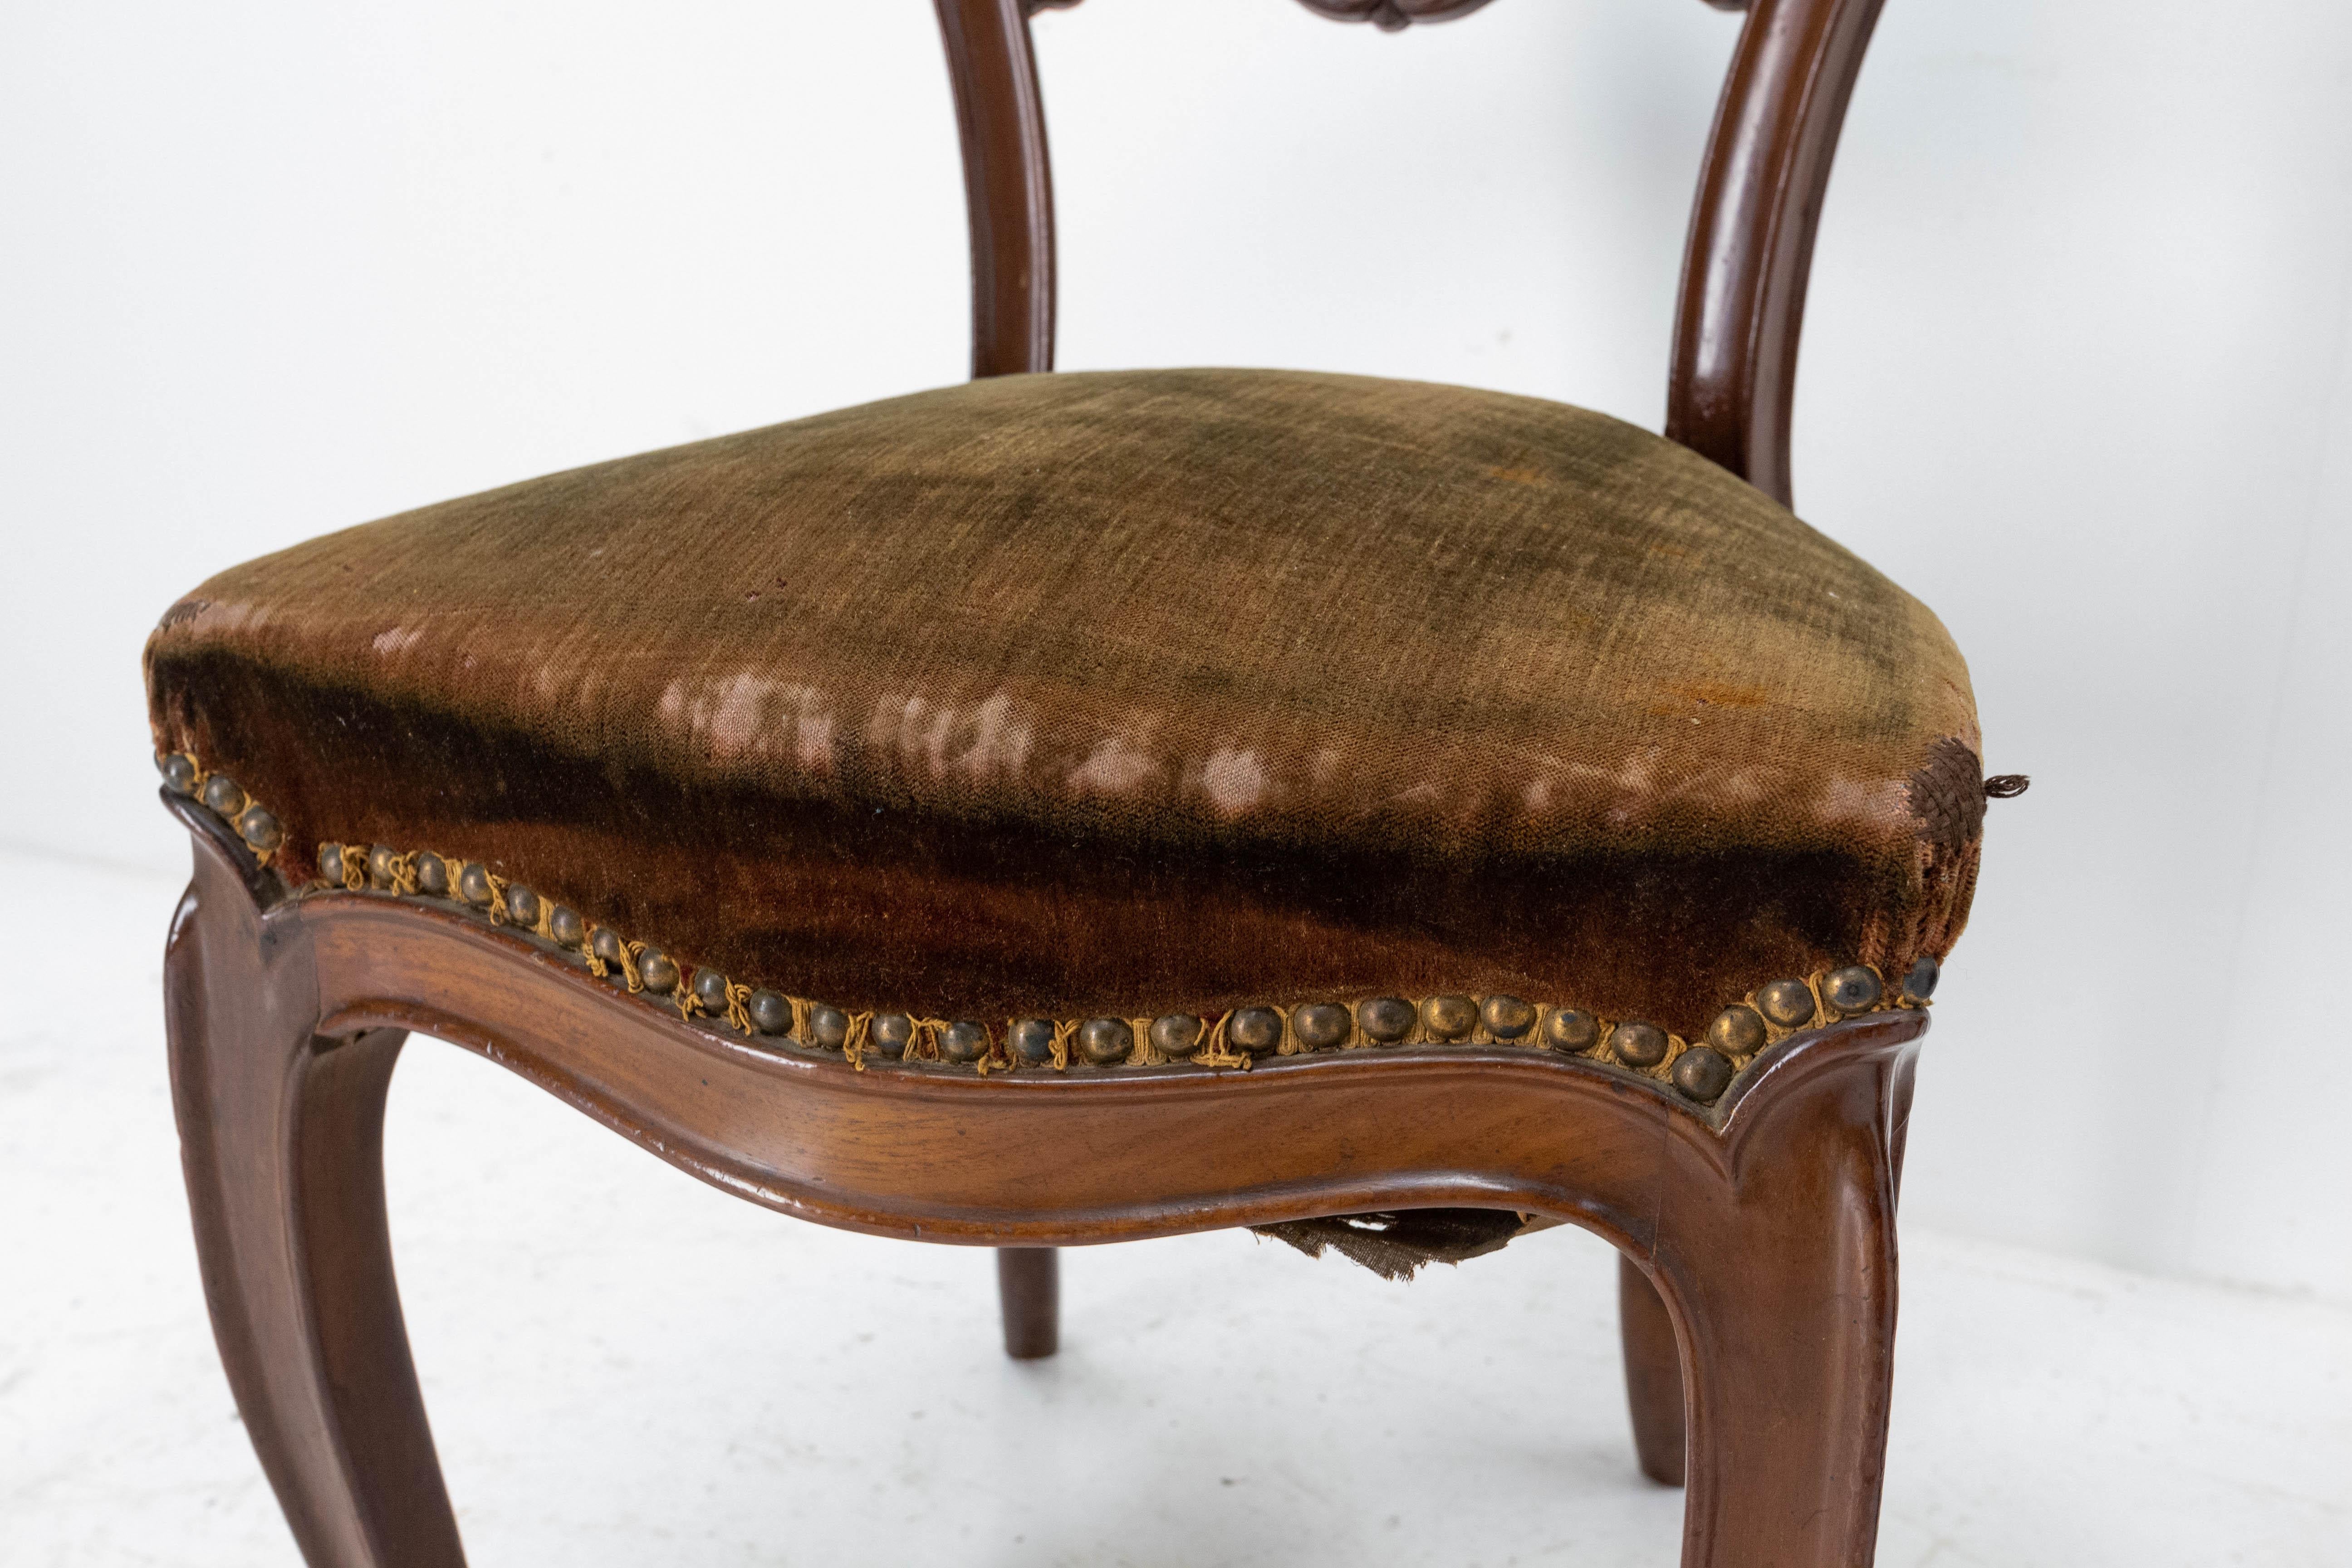 Pair of Napoleon III Exotic Wood and Velvet Chairs French, Late 19th Century For Sale 3